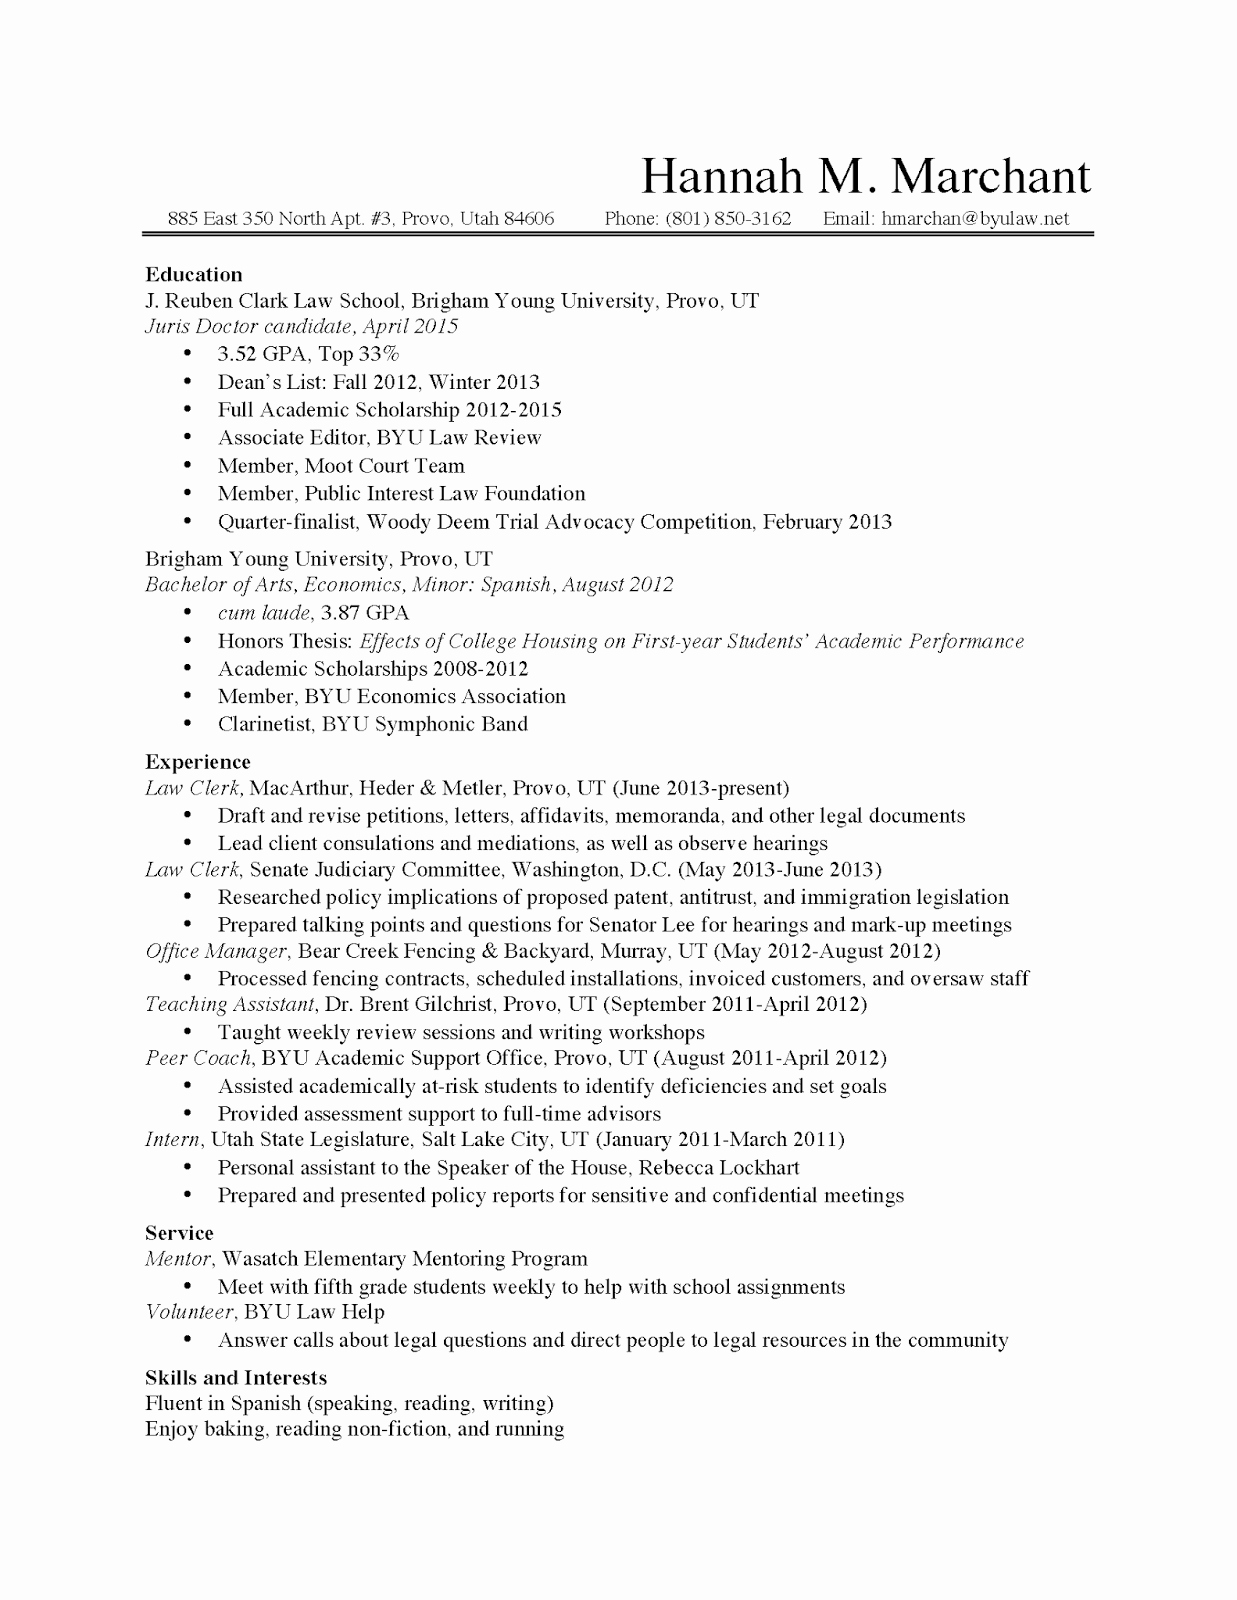 Jrcls Dc Law Student Resume Seeking Summer Position In